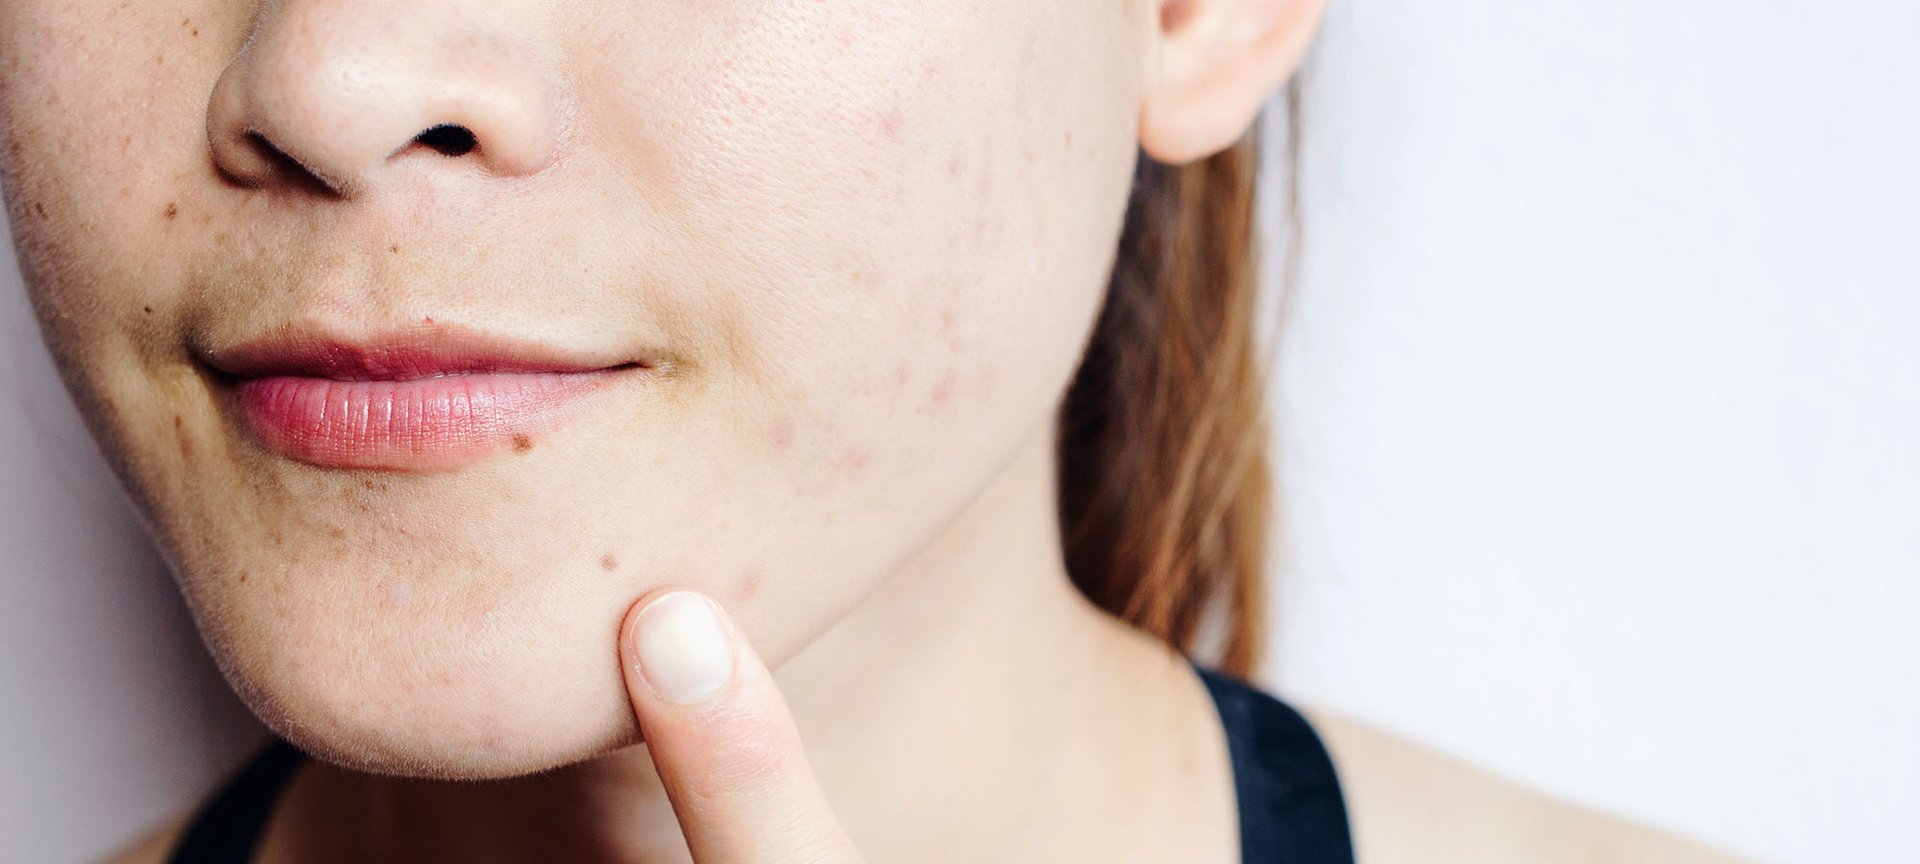 Clogged Pores What Causes Them And How